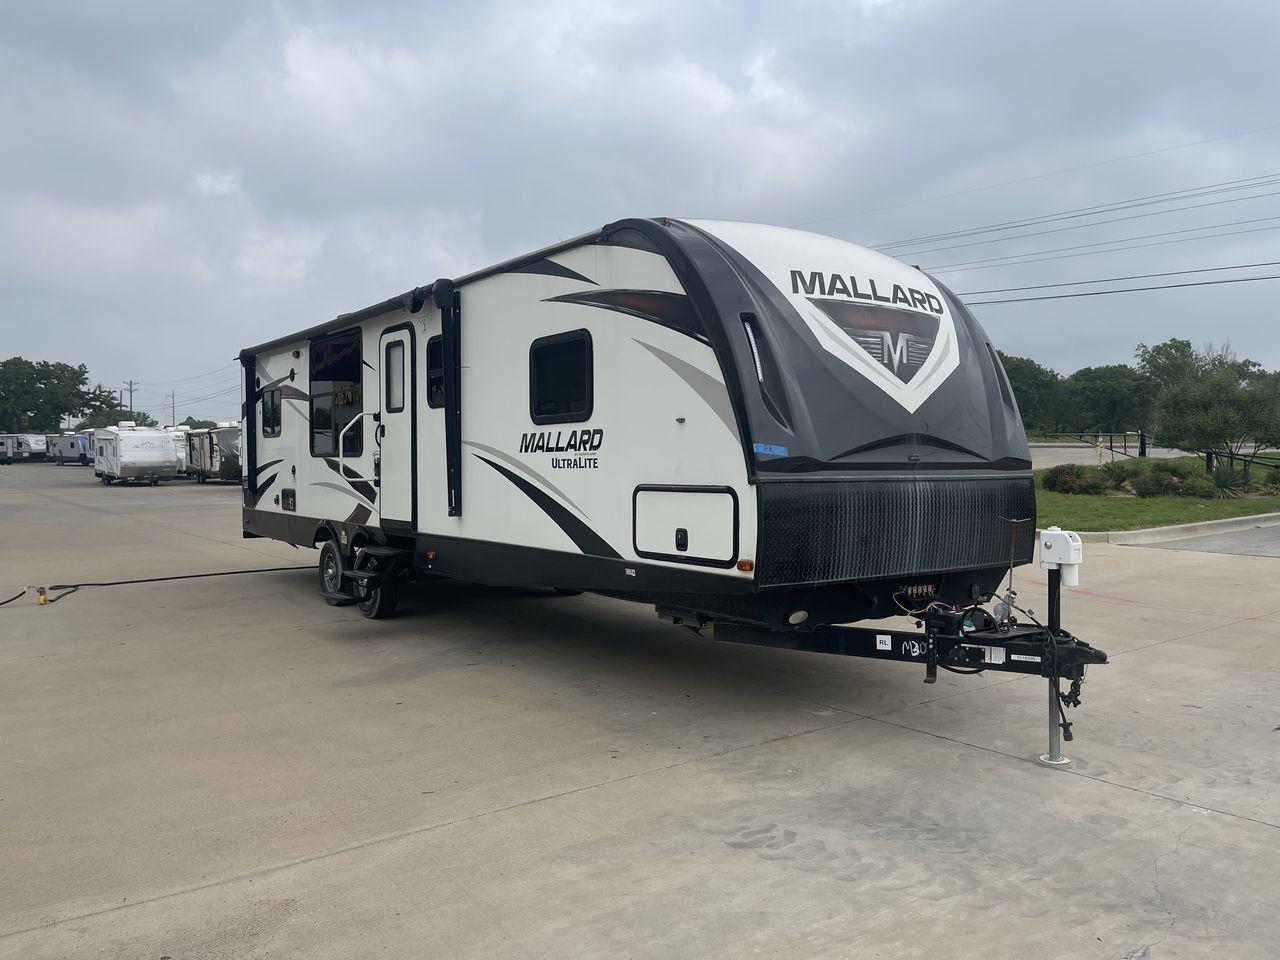 2018 HEARTLAND RECREATION MALLARD M302 (5SFNB3623JE) , Length: 36.7 ft. | Dry Weight: 6,795 lbs. lbs | Gross Weight: 8,600 lbs | Slides: 2 transmission, located at 4319 N Main Street, Cleburne, TX, 76033, (817) 221-0660, 32.435829, -97.384178 - The 2018 Heartland Recreation Mallard M302 is 36.7 feet long and weighs 6,795 pounds dry, so it's both roomy and easy to pull. It is built to last with an aluminum body and fiberglass sidewalls, so you can count on it for your car trips. This trailer's two slides make the most of the space inside, g - Photo #23